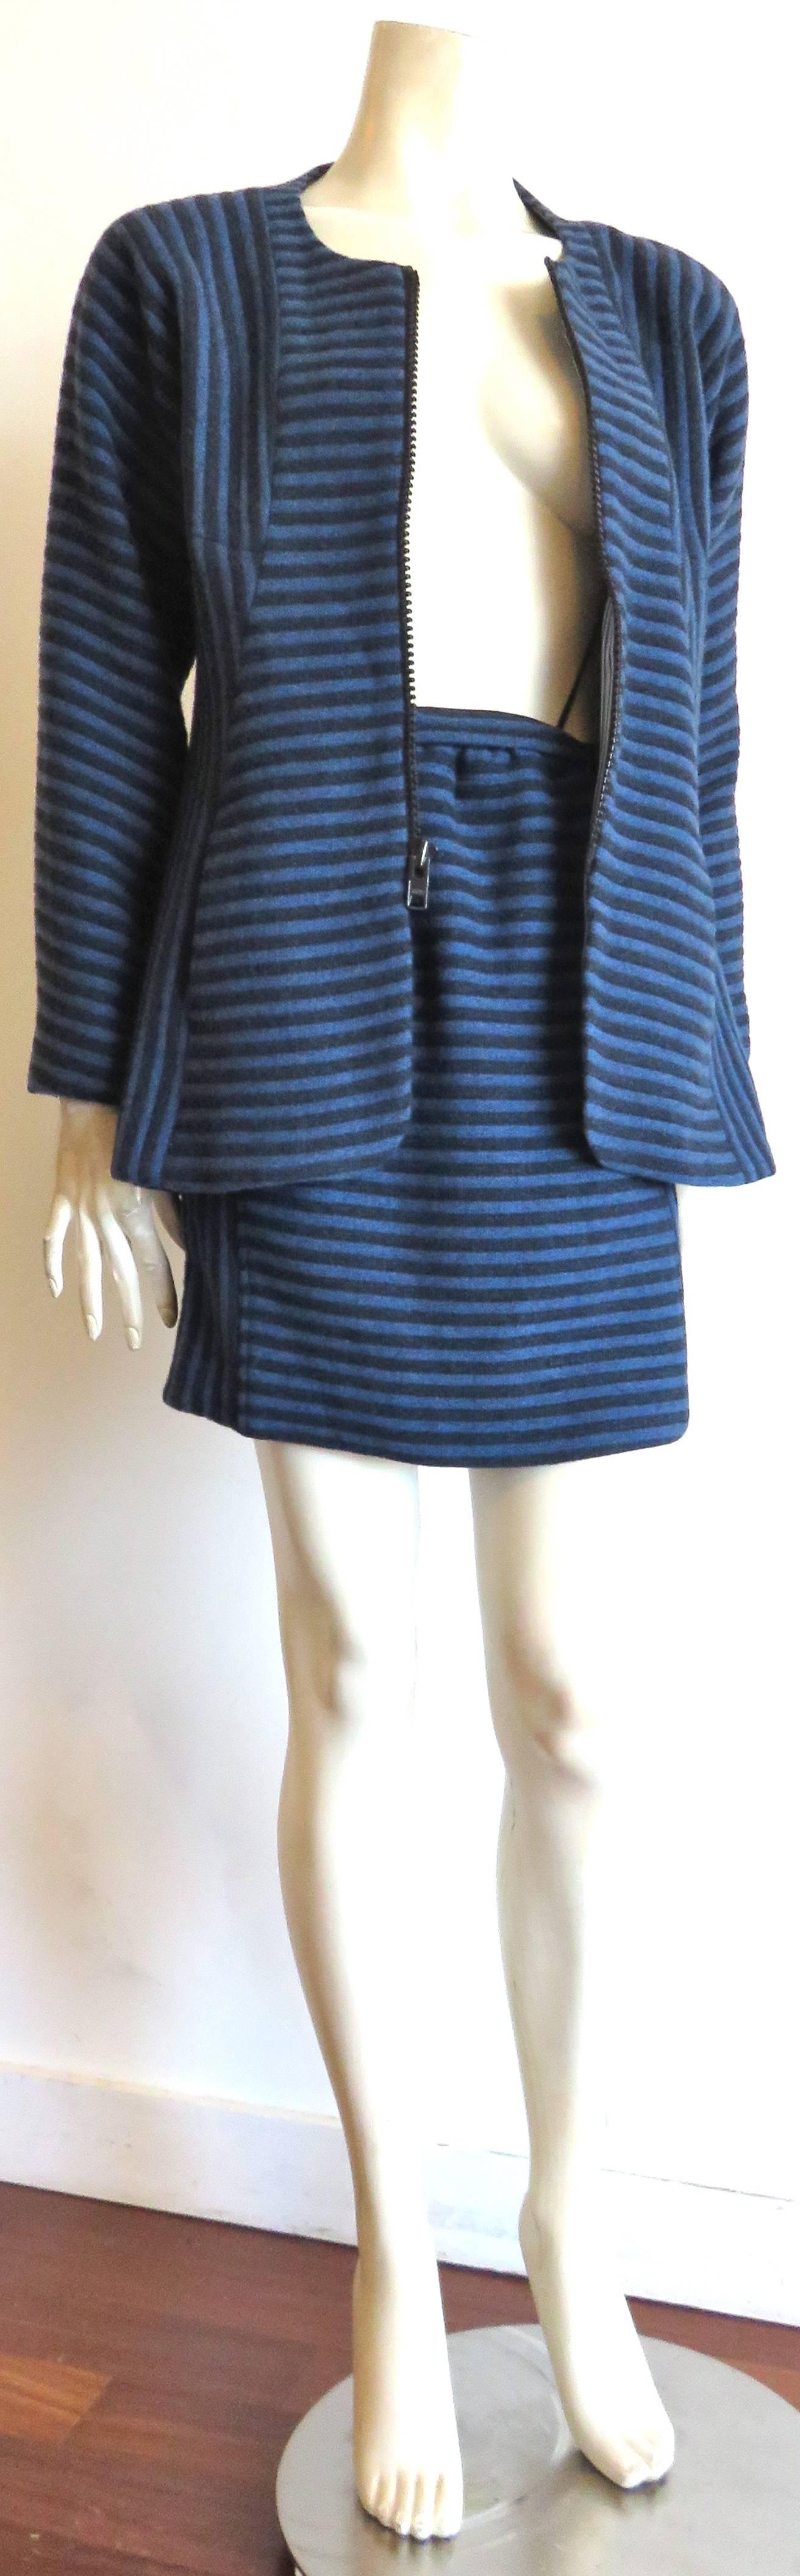 Mint condition, 1995, GEOFFREY BEENE, blue and dark midnight striped wool, mini-skirt suit set.

Gorgeous, seam paneling with contrast directional stripe technique.

Zipper front opening with curved front hem.

Raglan sleeve construction at